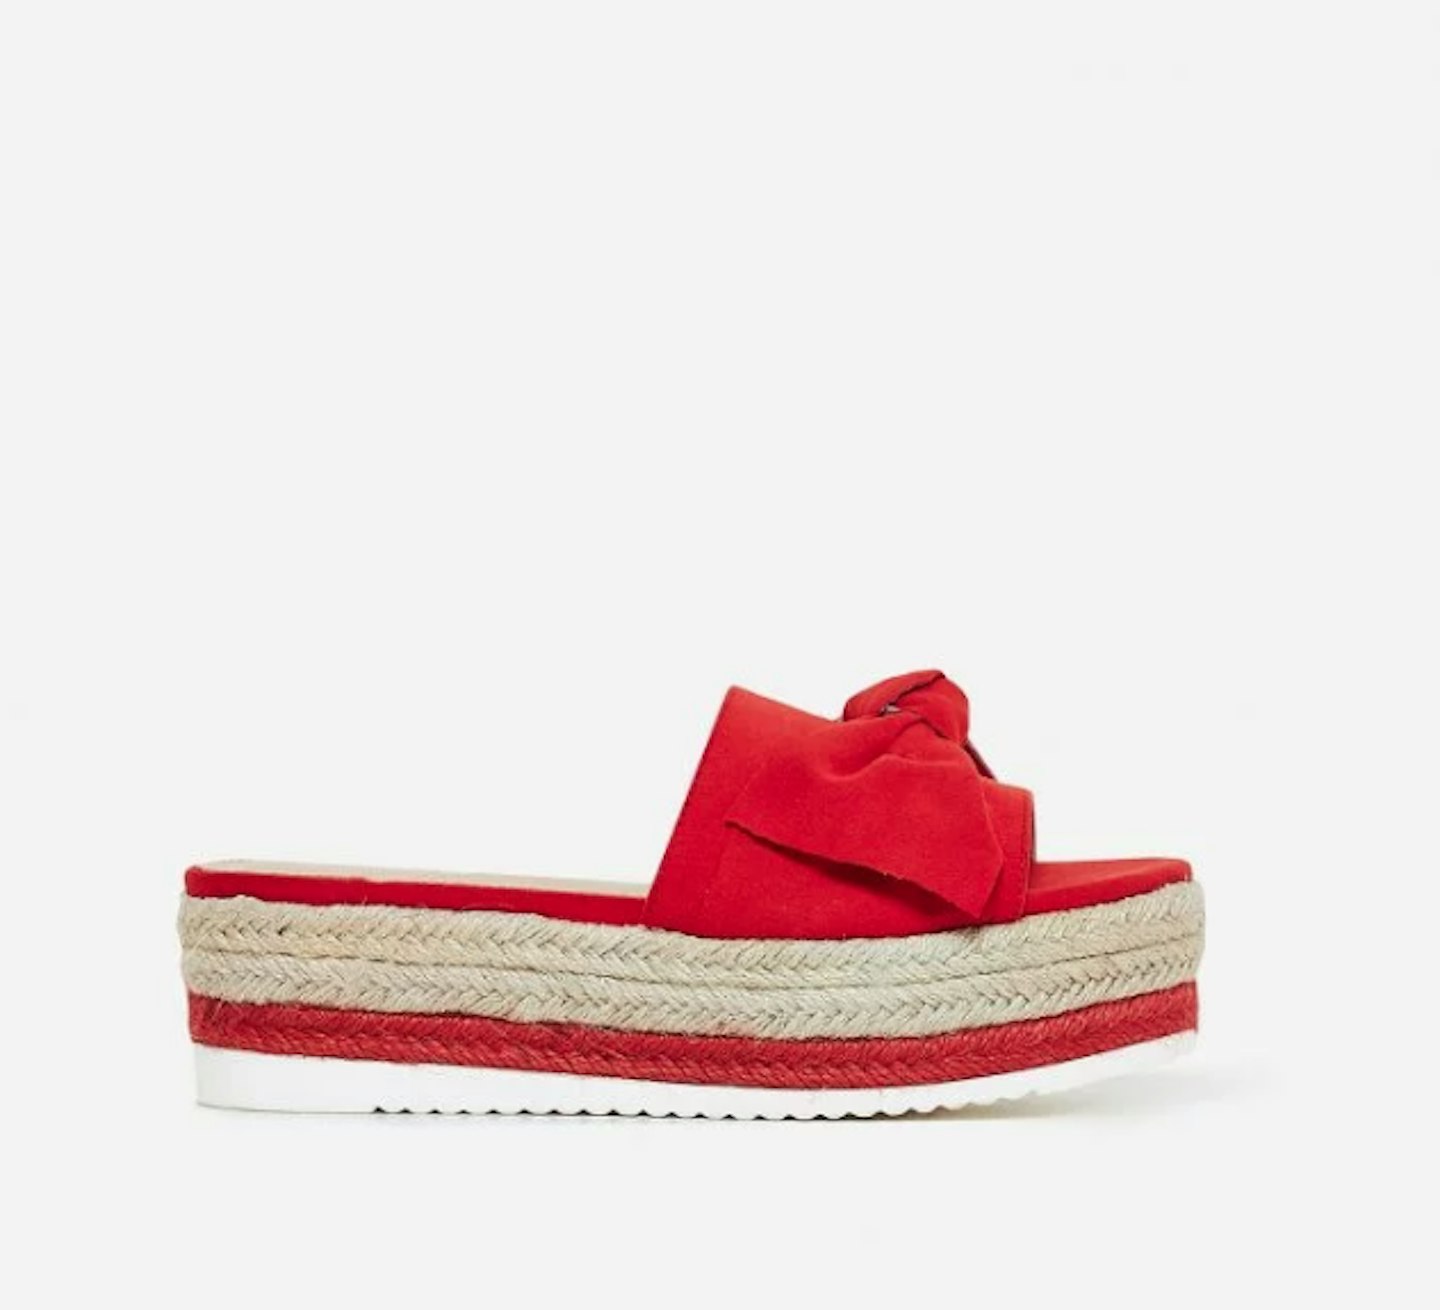 ego shoes red sandals